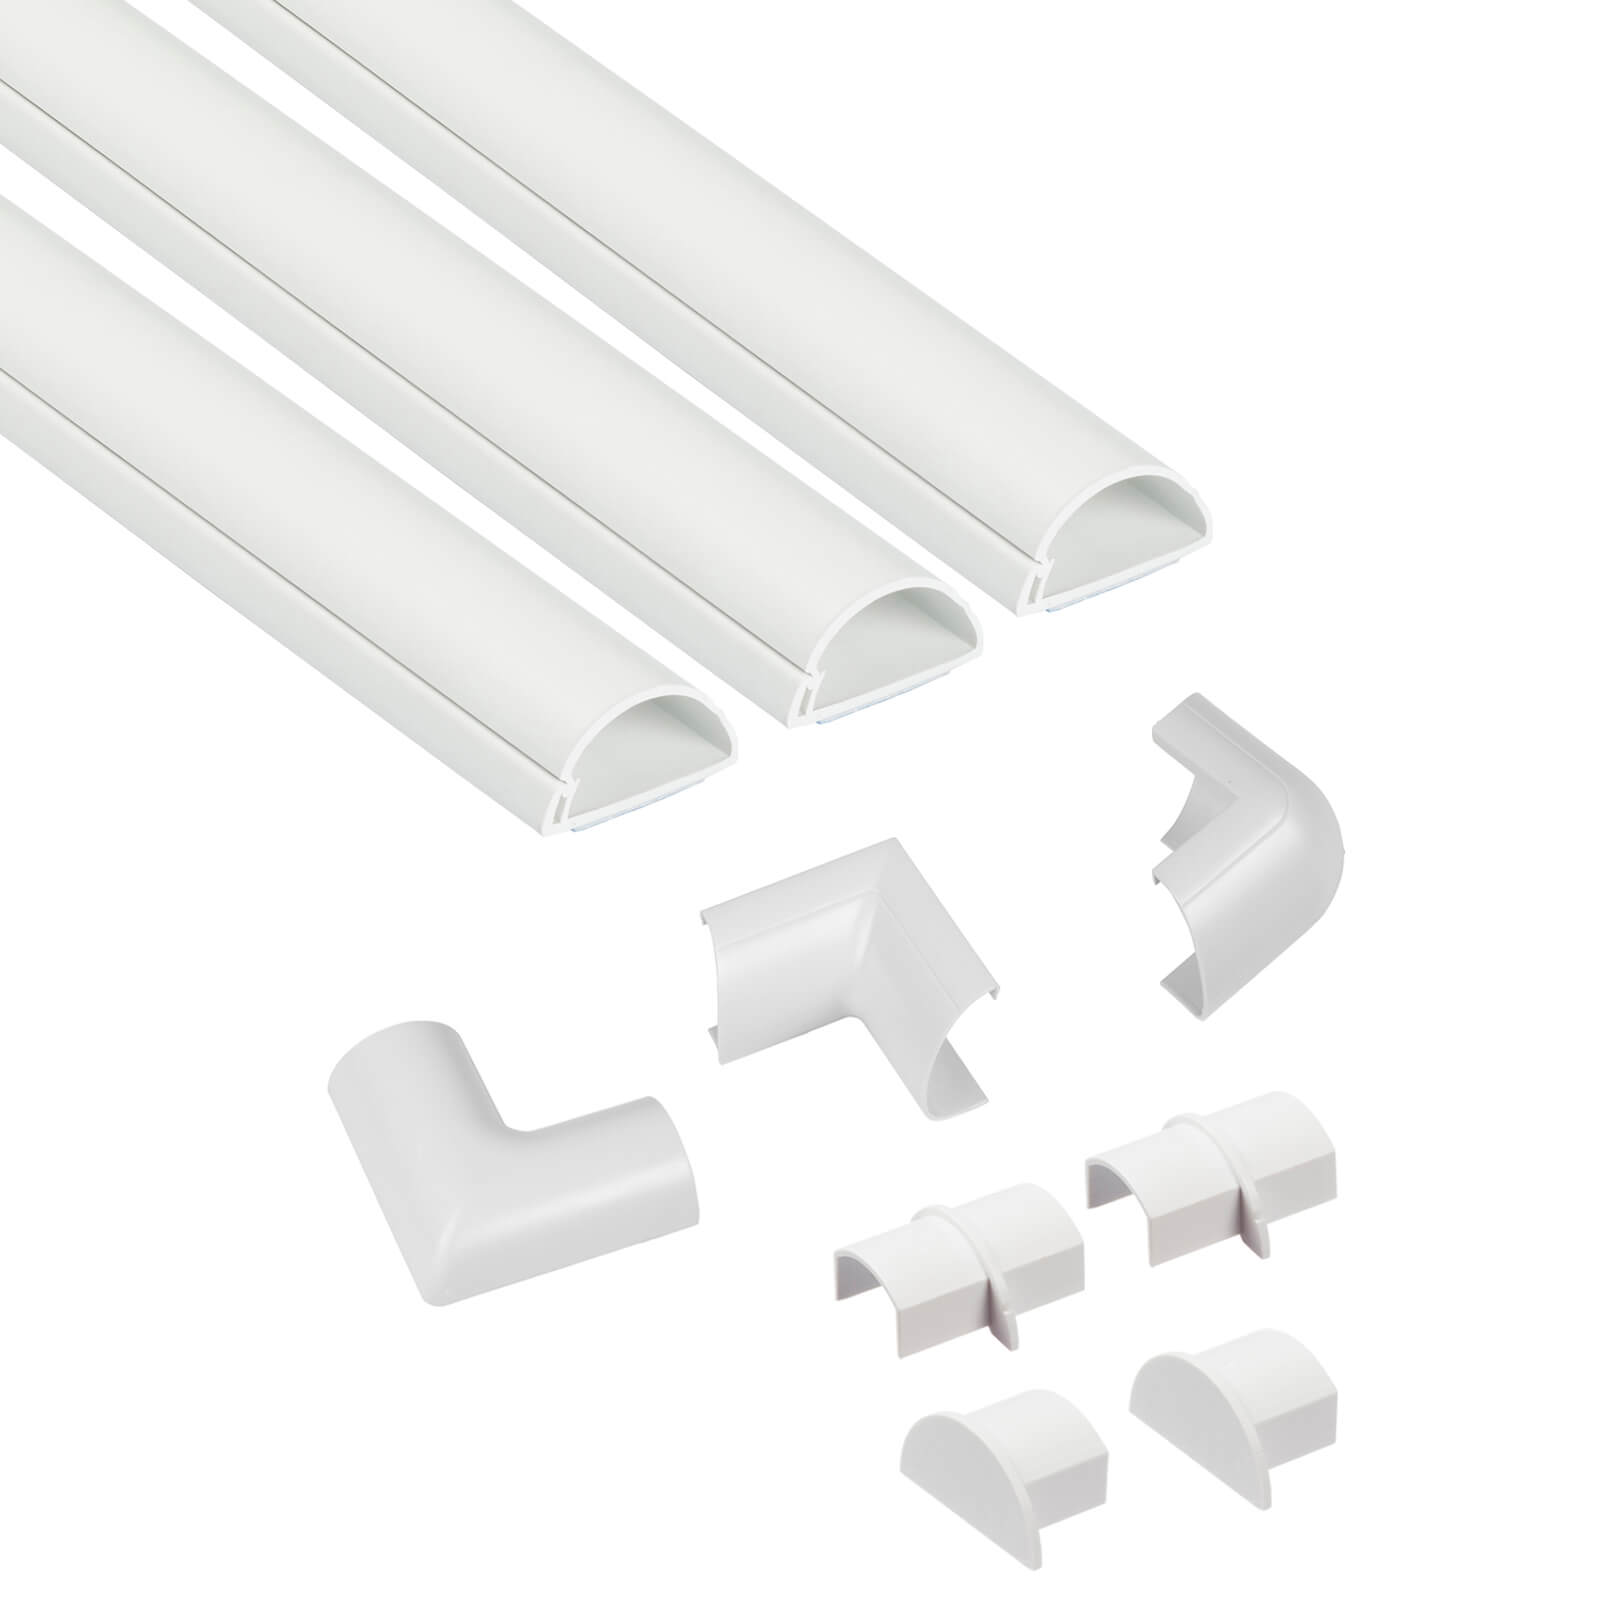 Photo of D-line Mini Decorative Self Adhesive Trunking Multipack 3 X 30mm X 15mm X 1-meter Lengths & Accessories - White